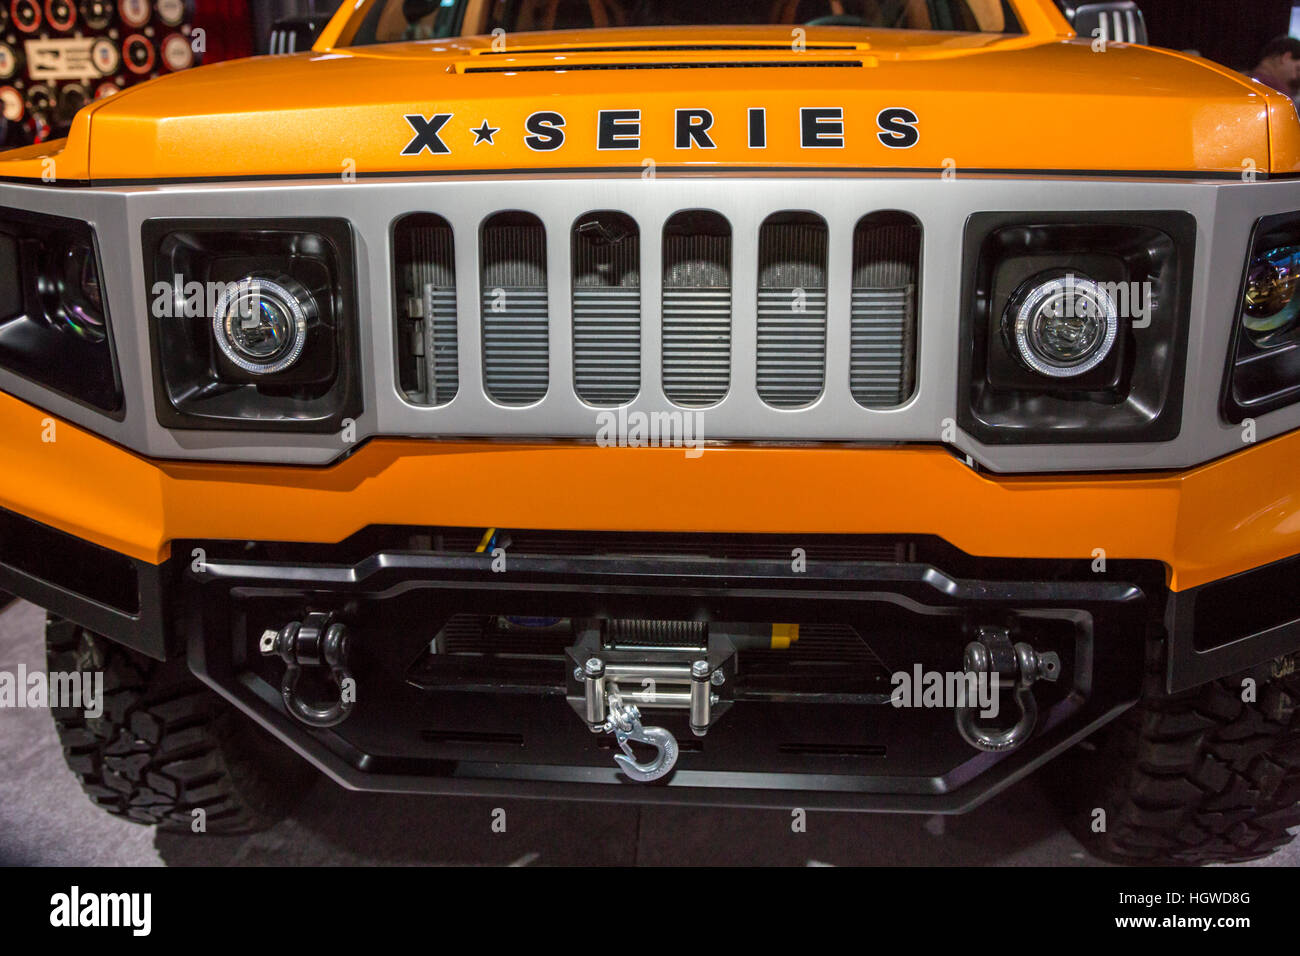 Detroit, Michigan - VLF Automotive's X-Series concept truck on display at the North American International Auto Show. Stock Photo